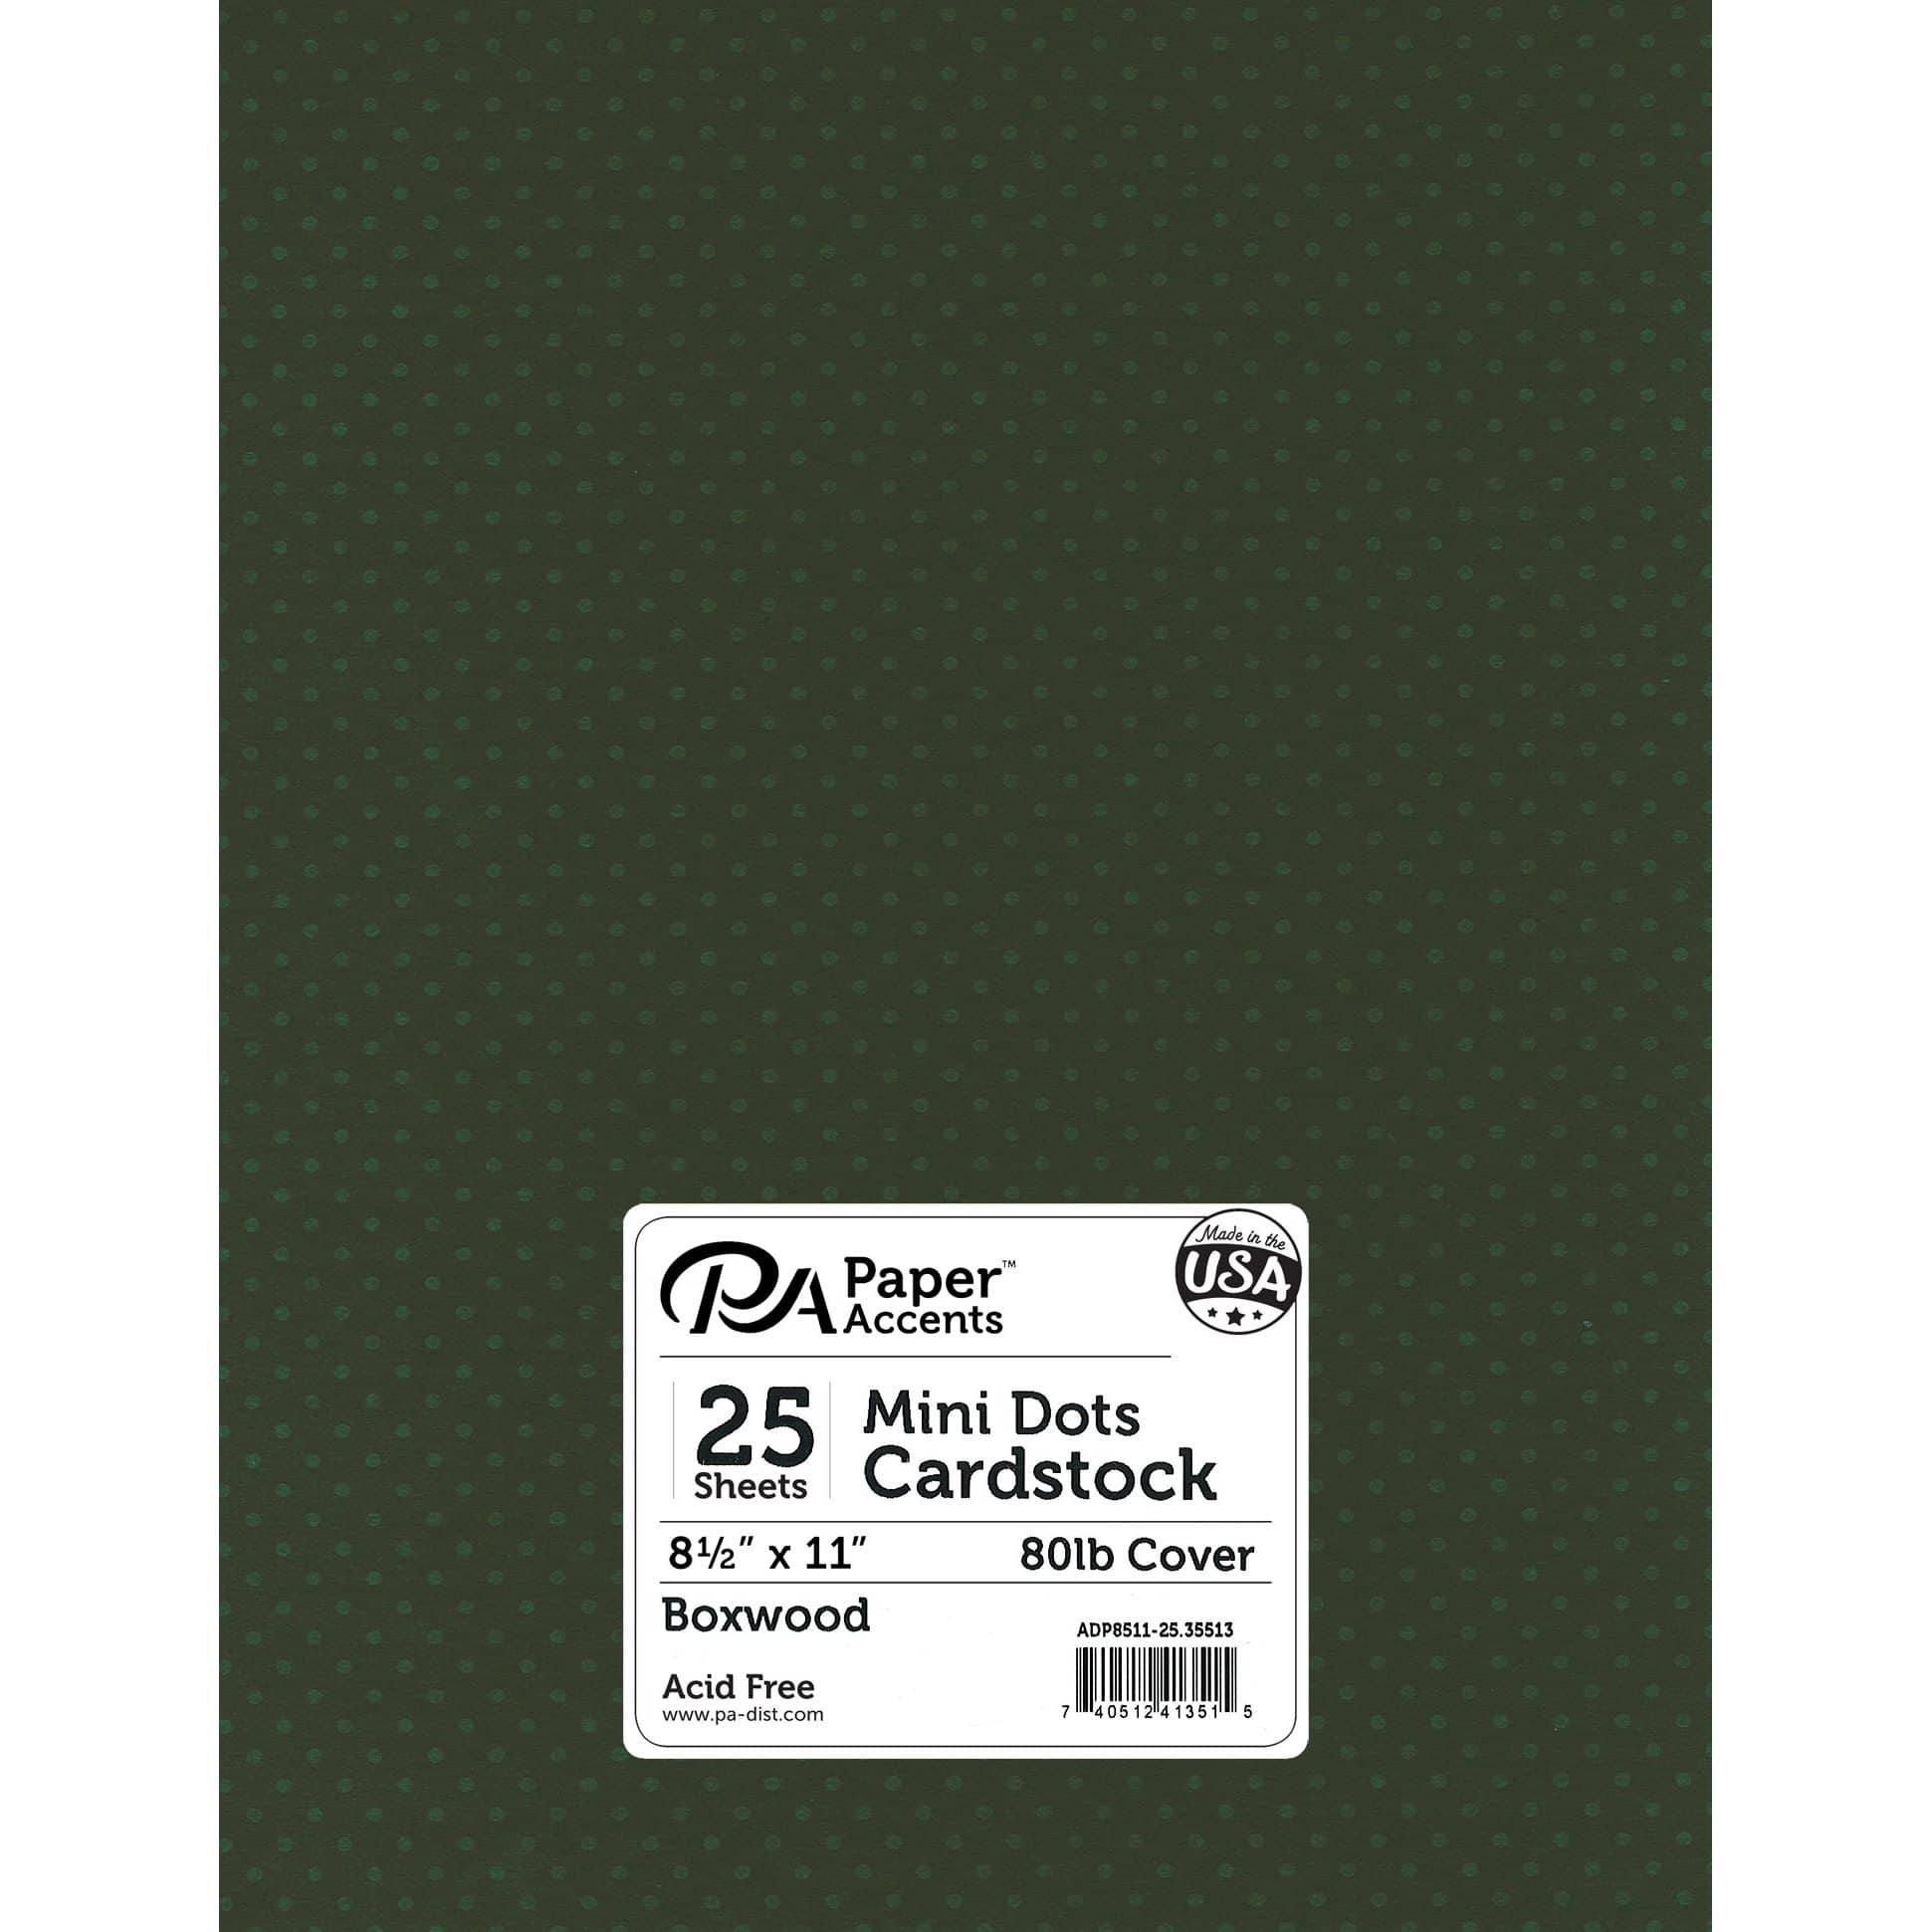 PA Paper™ Accents Mini Dot 8.5" x 11" Cardstock, 25 Sheets